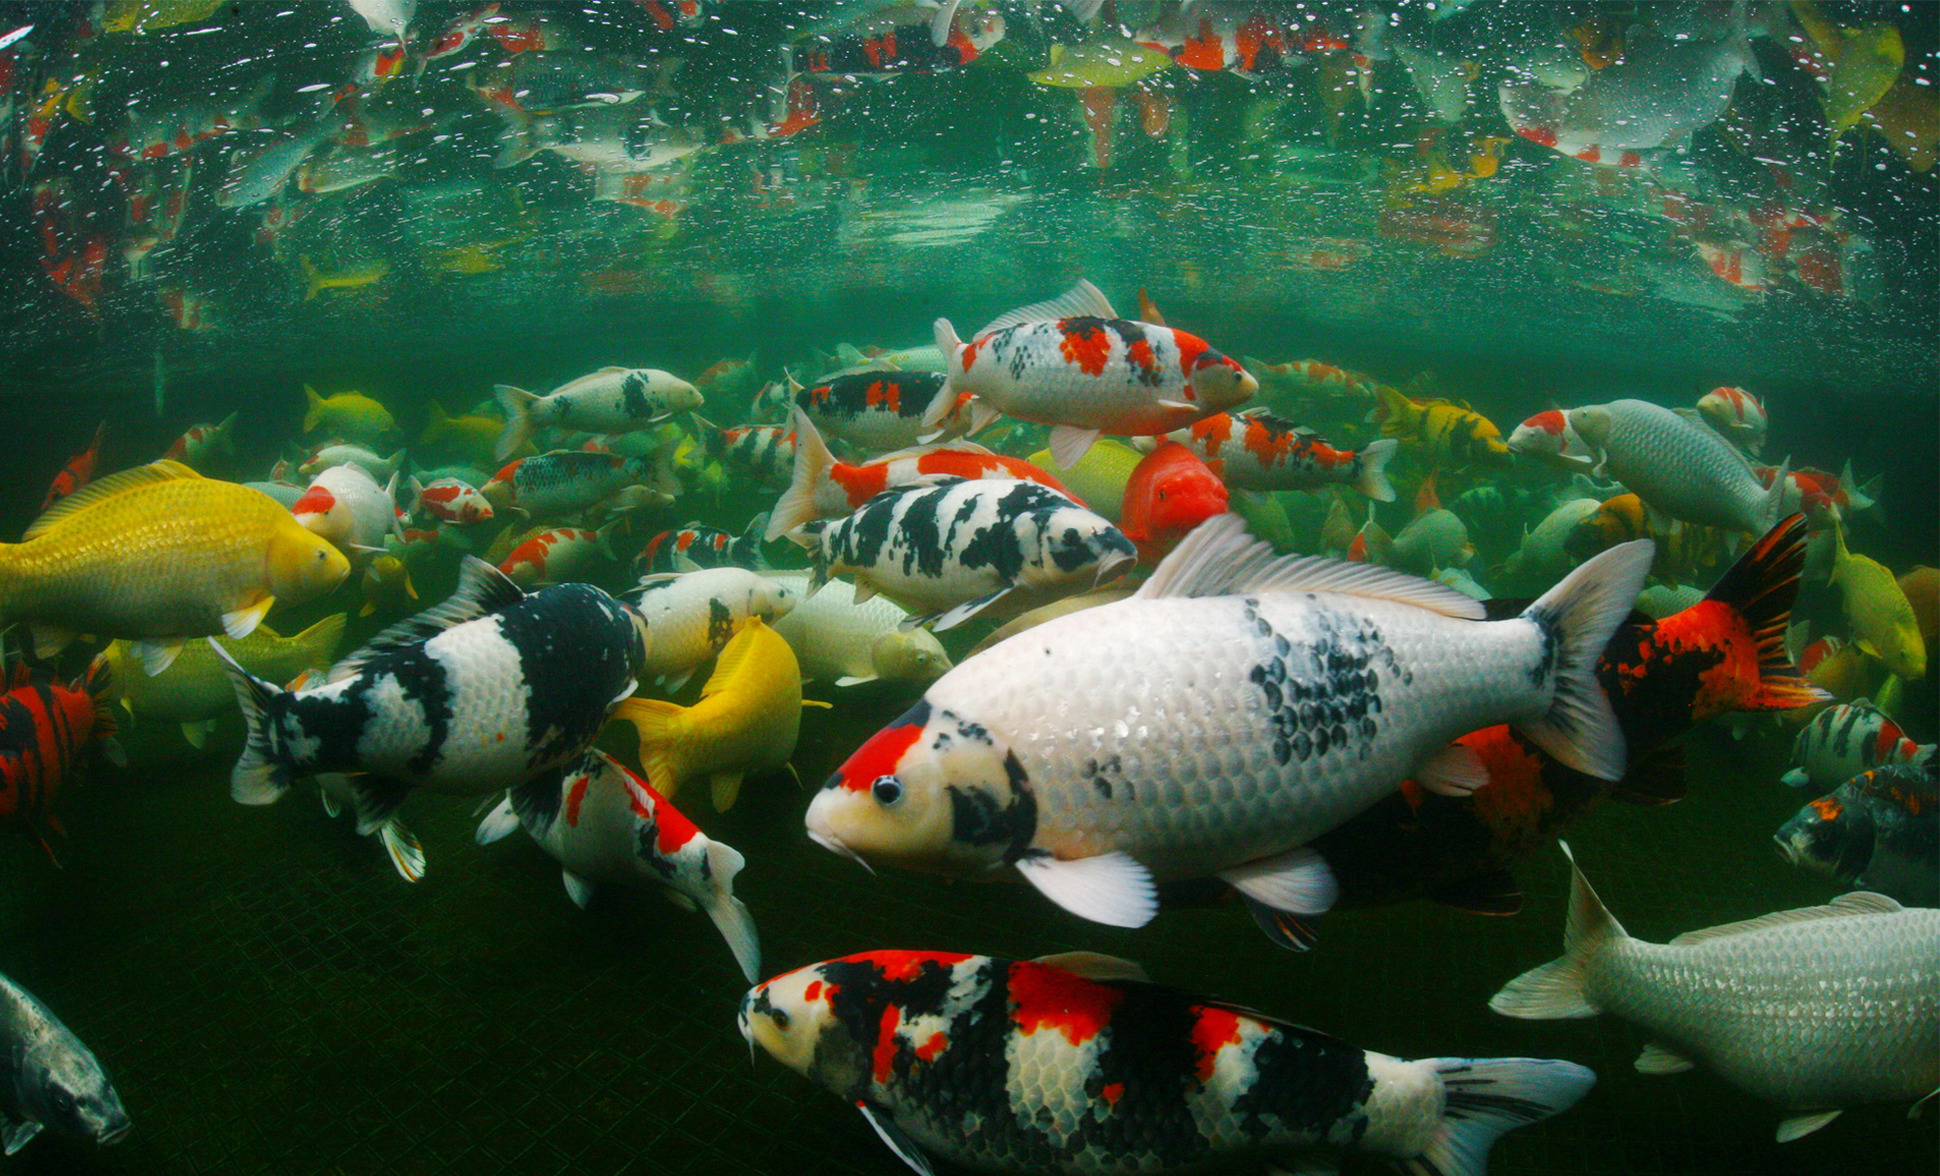 JBL receives permission to take underwater pictures from Japan’s koi